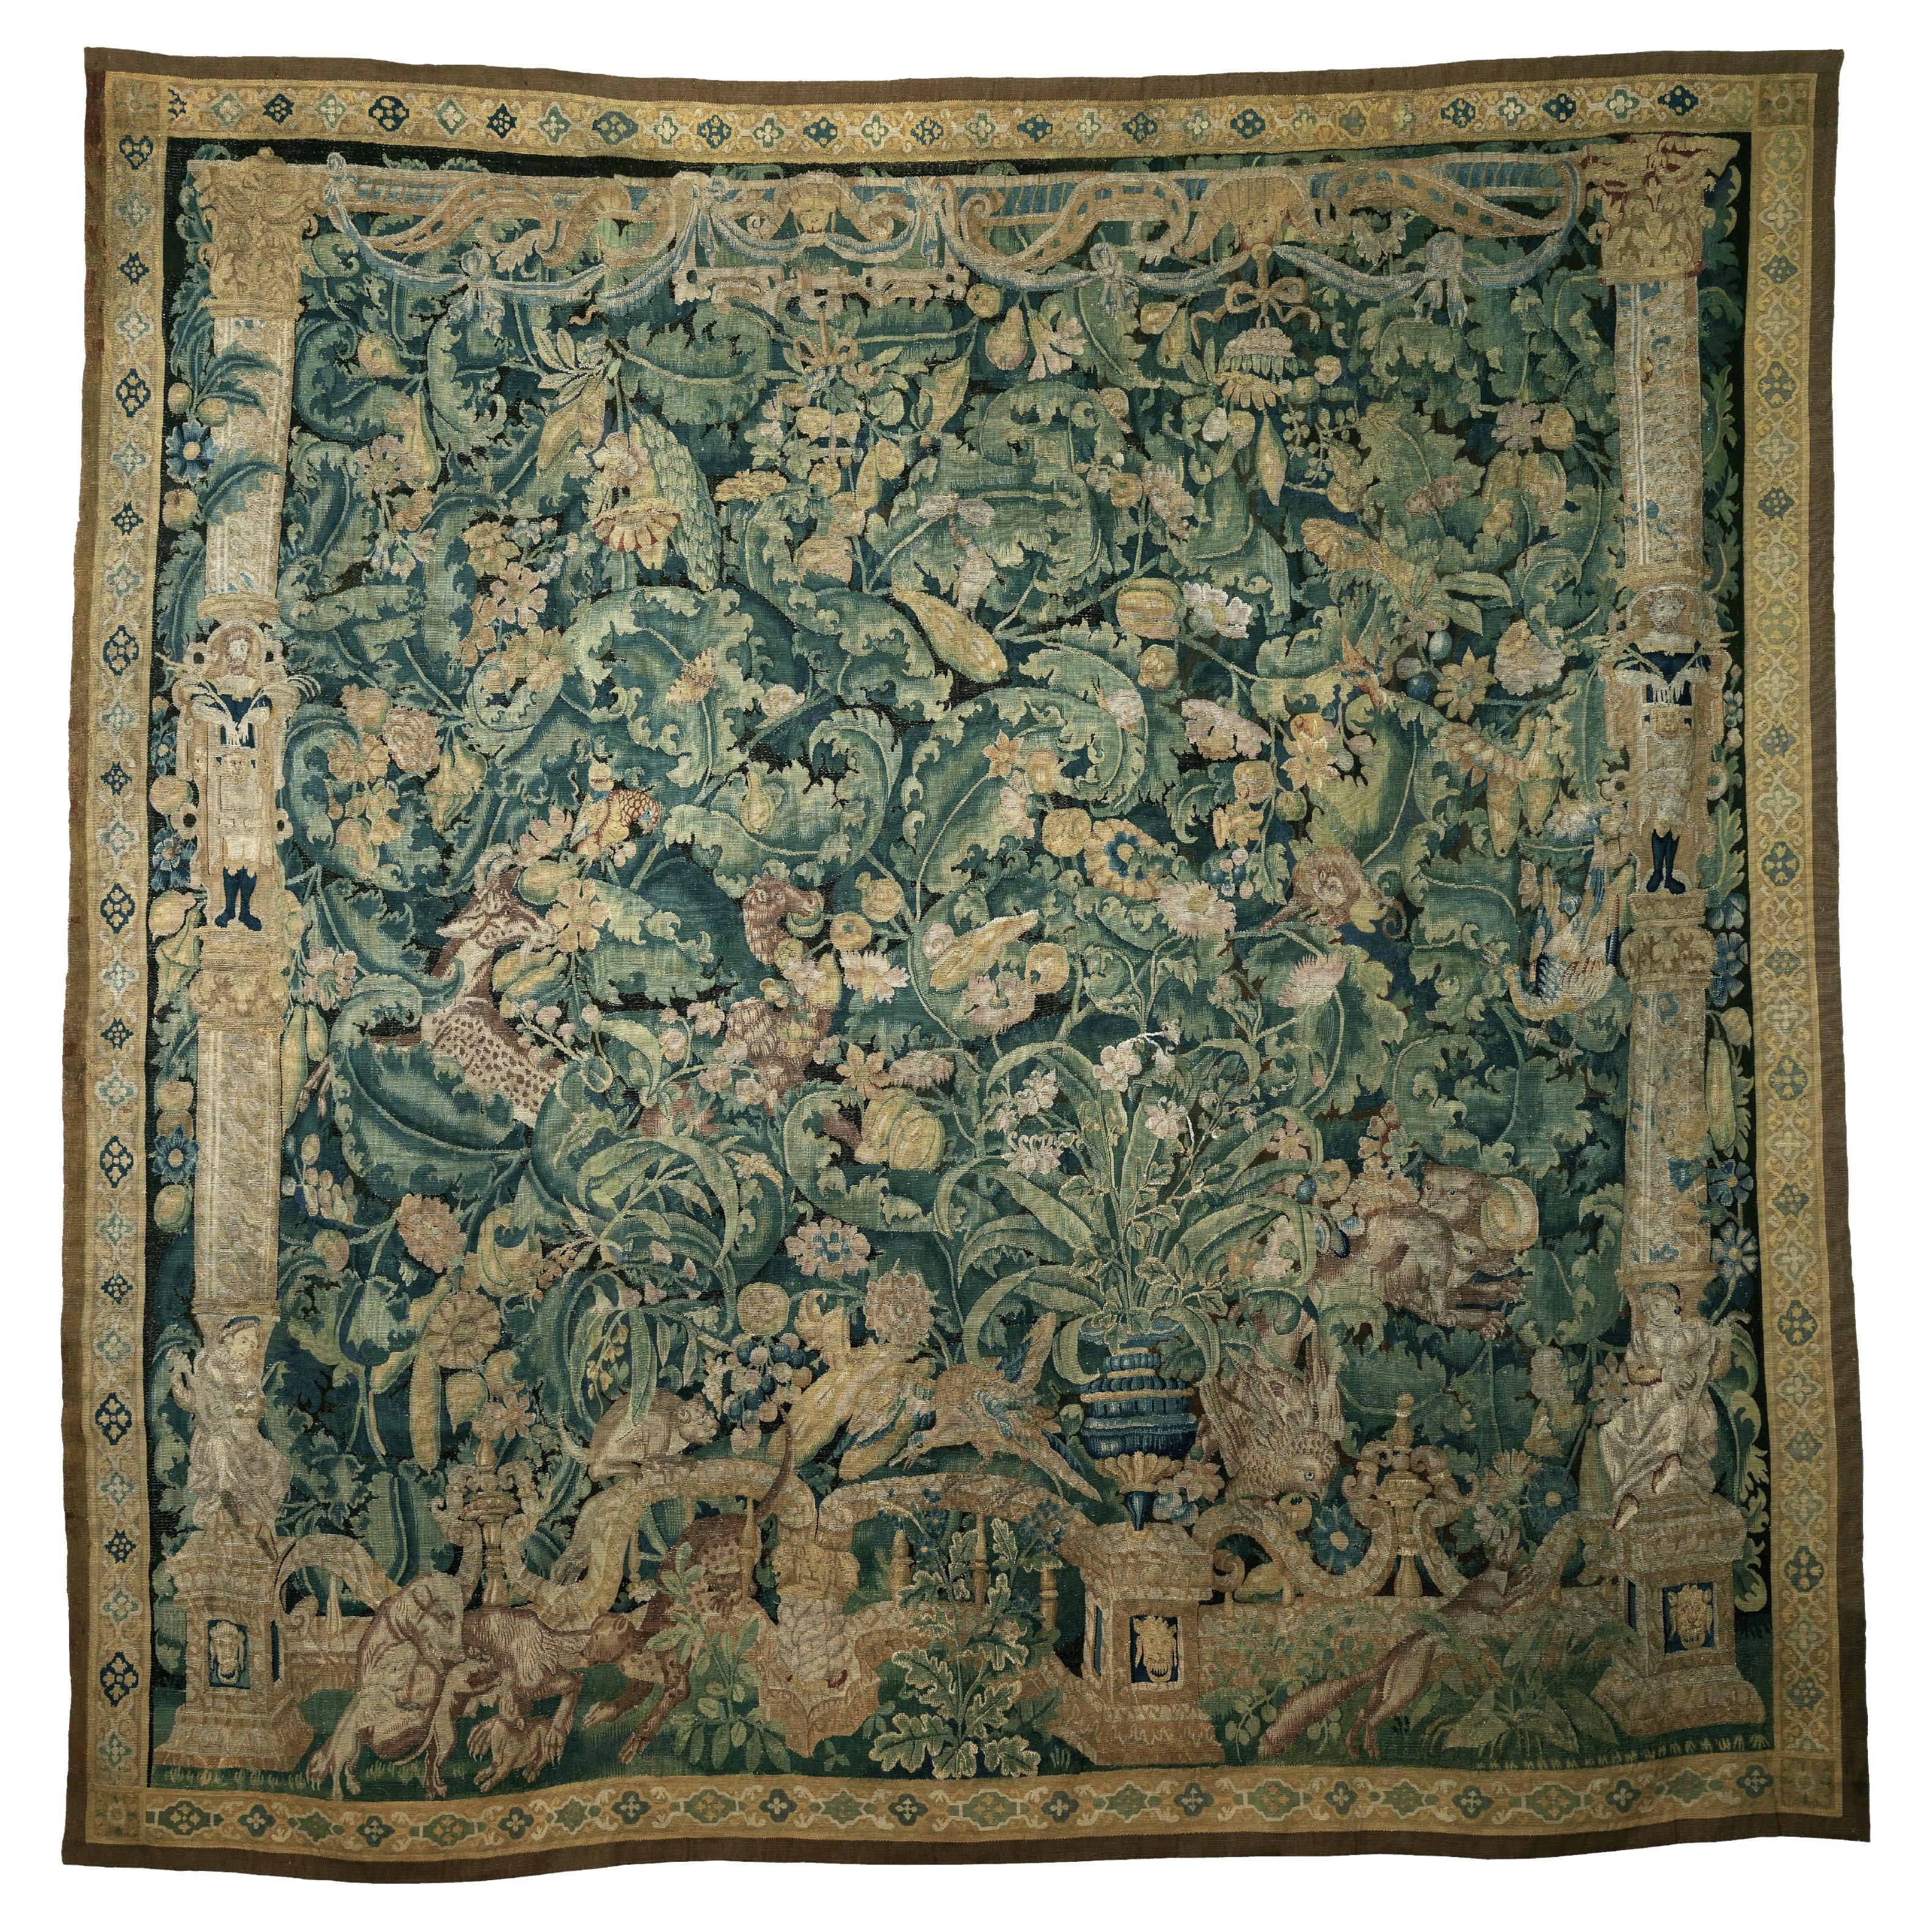 Flemish Hand-Woven "Feuilles de Choux" Tapestry, Silk and Wool